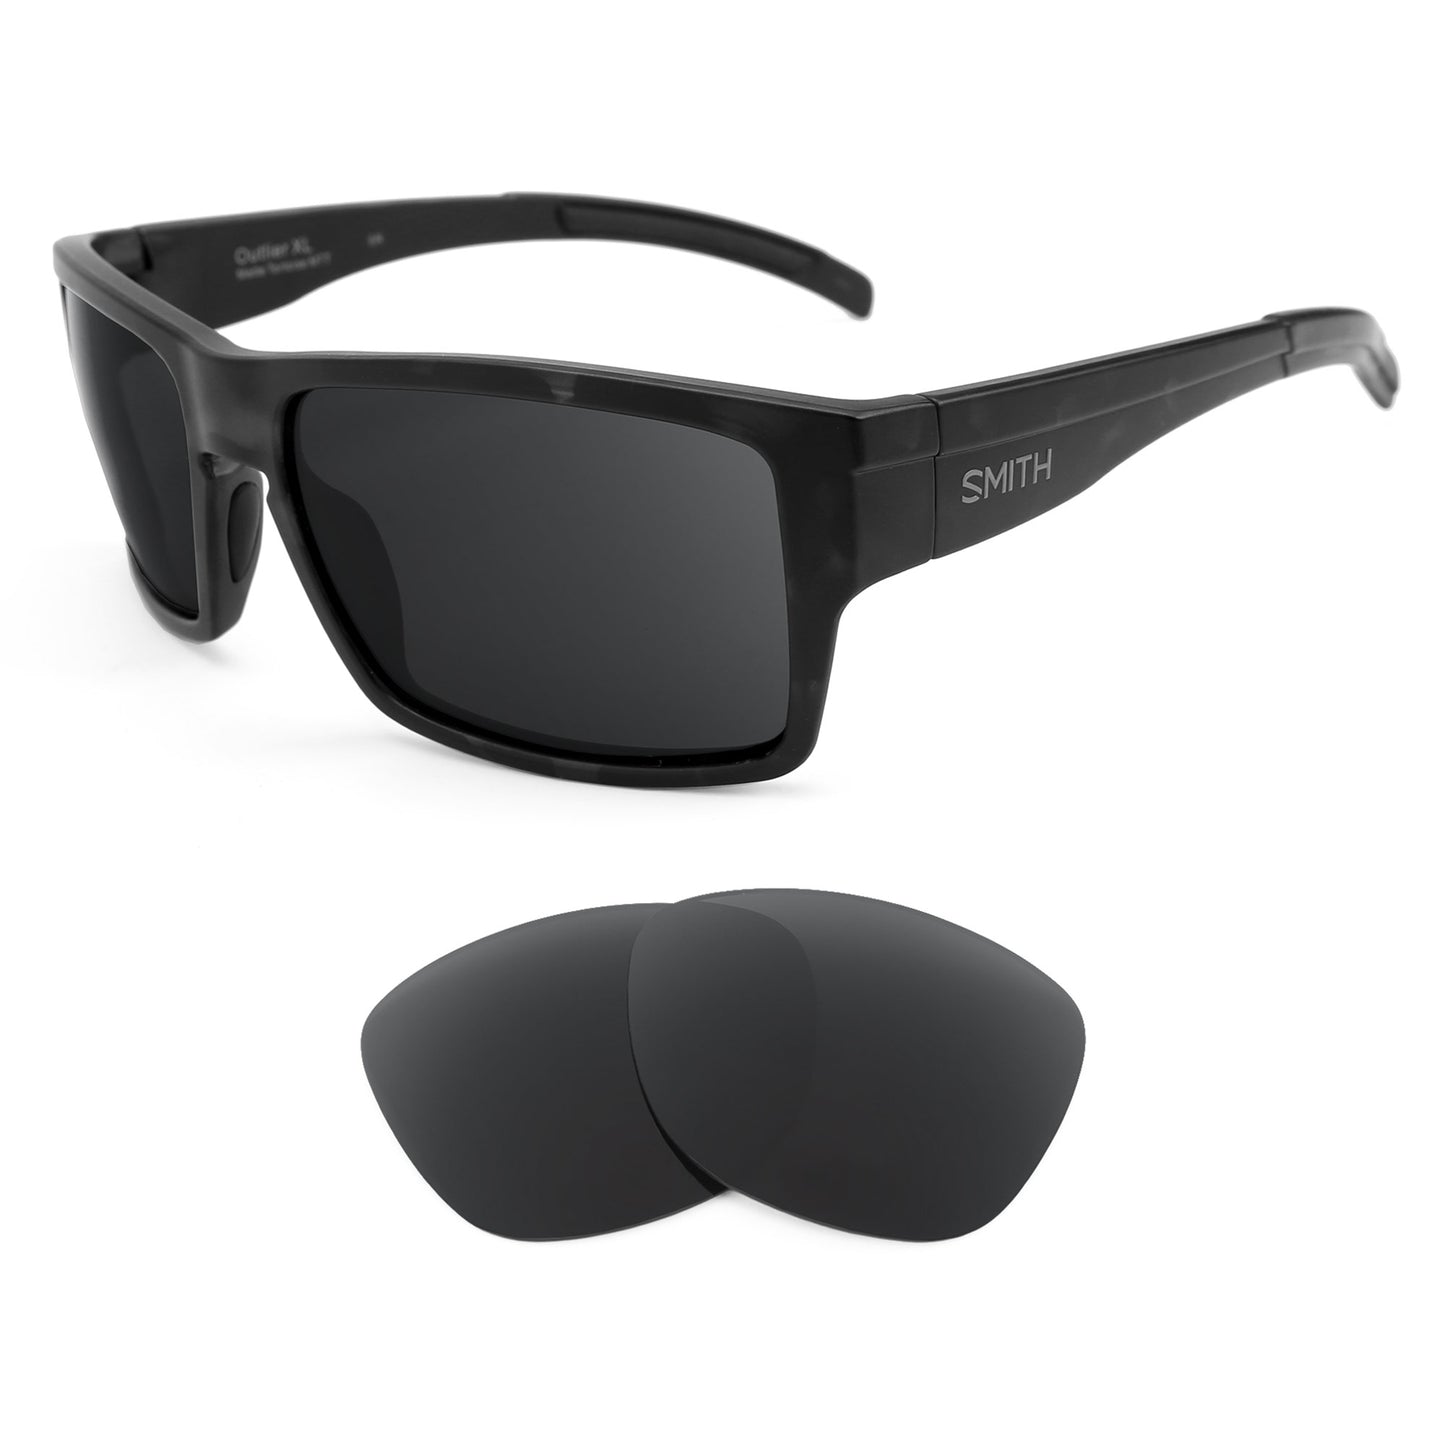 Smith Outlier XL sunglasses with replacement lenses